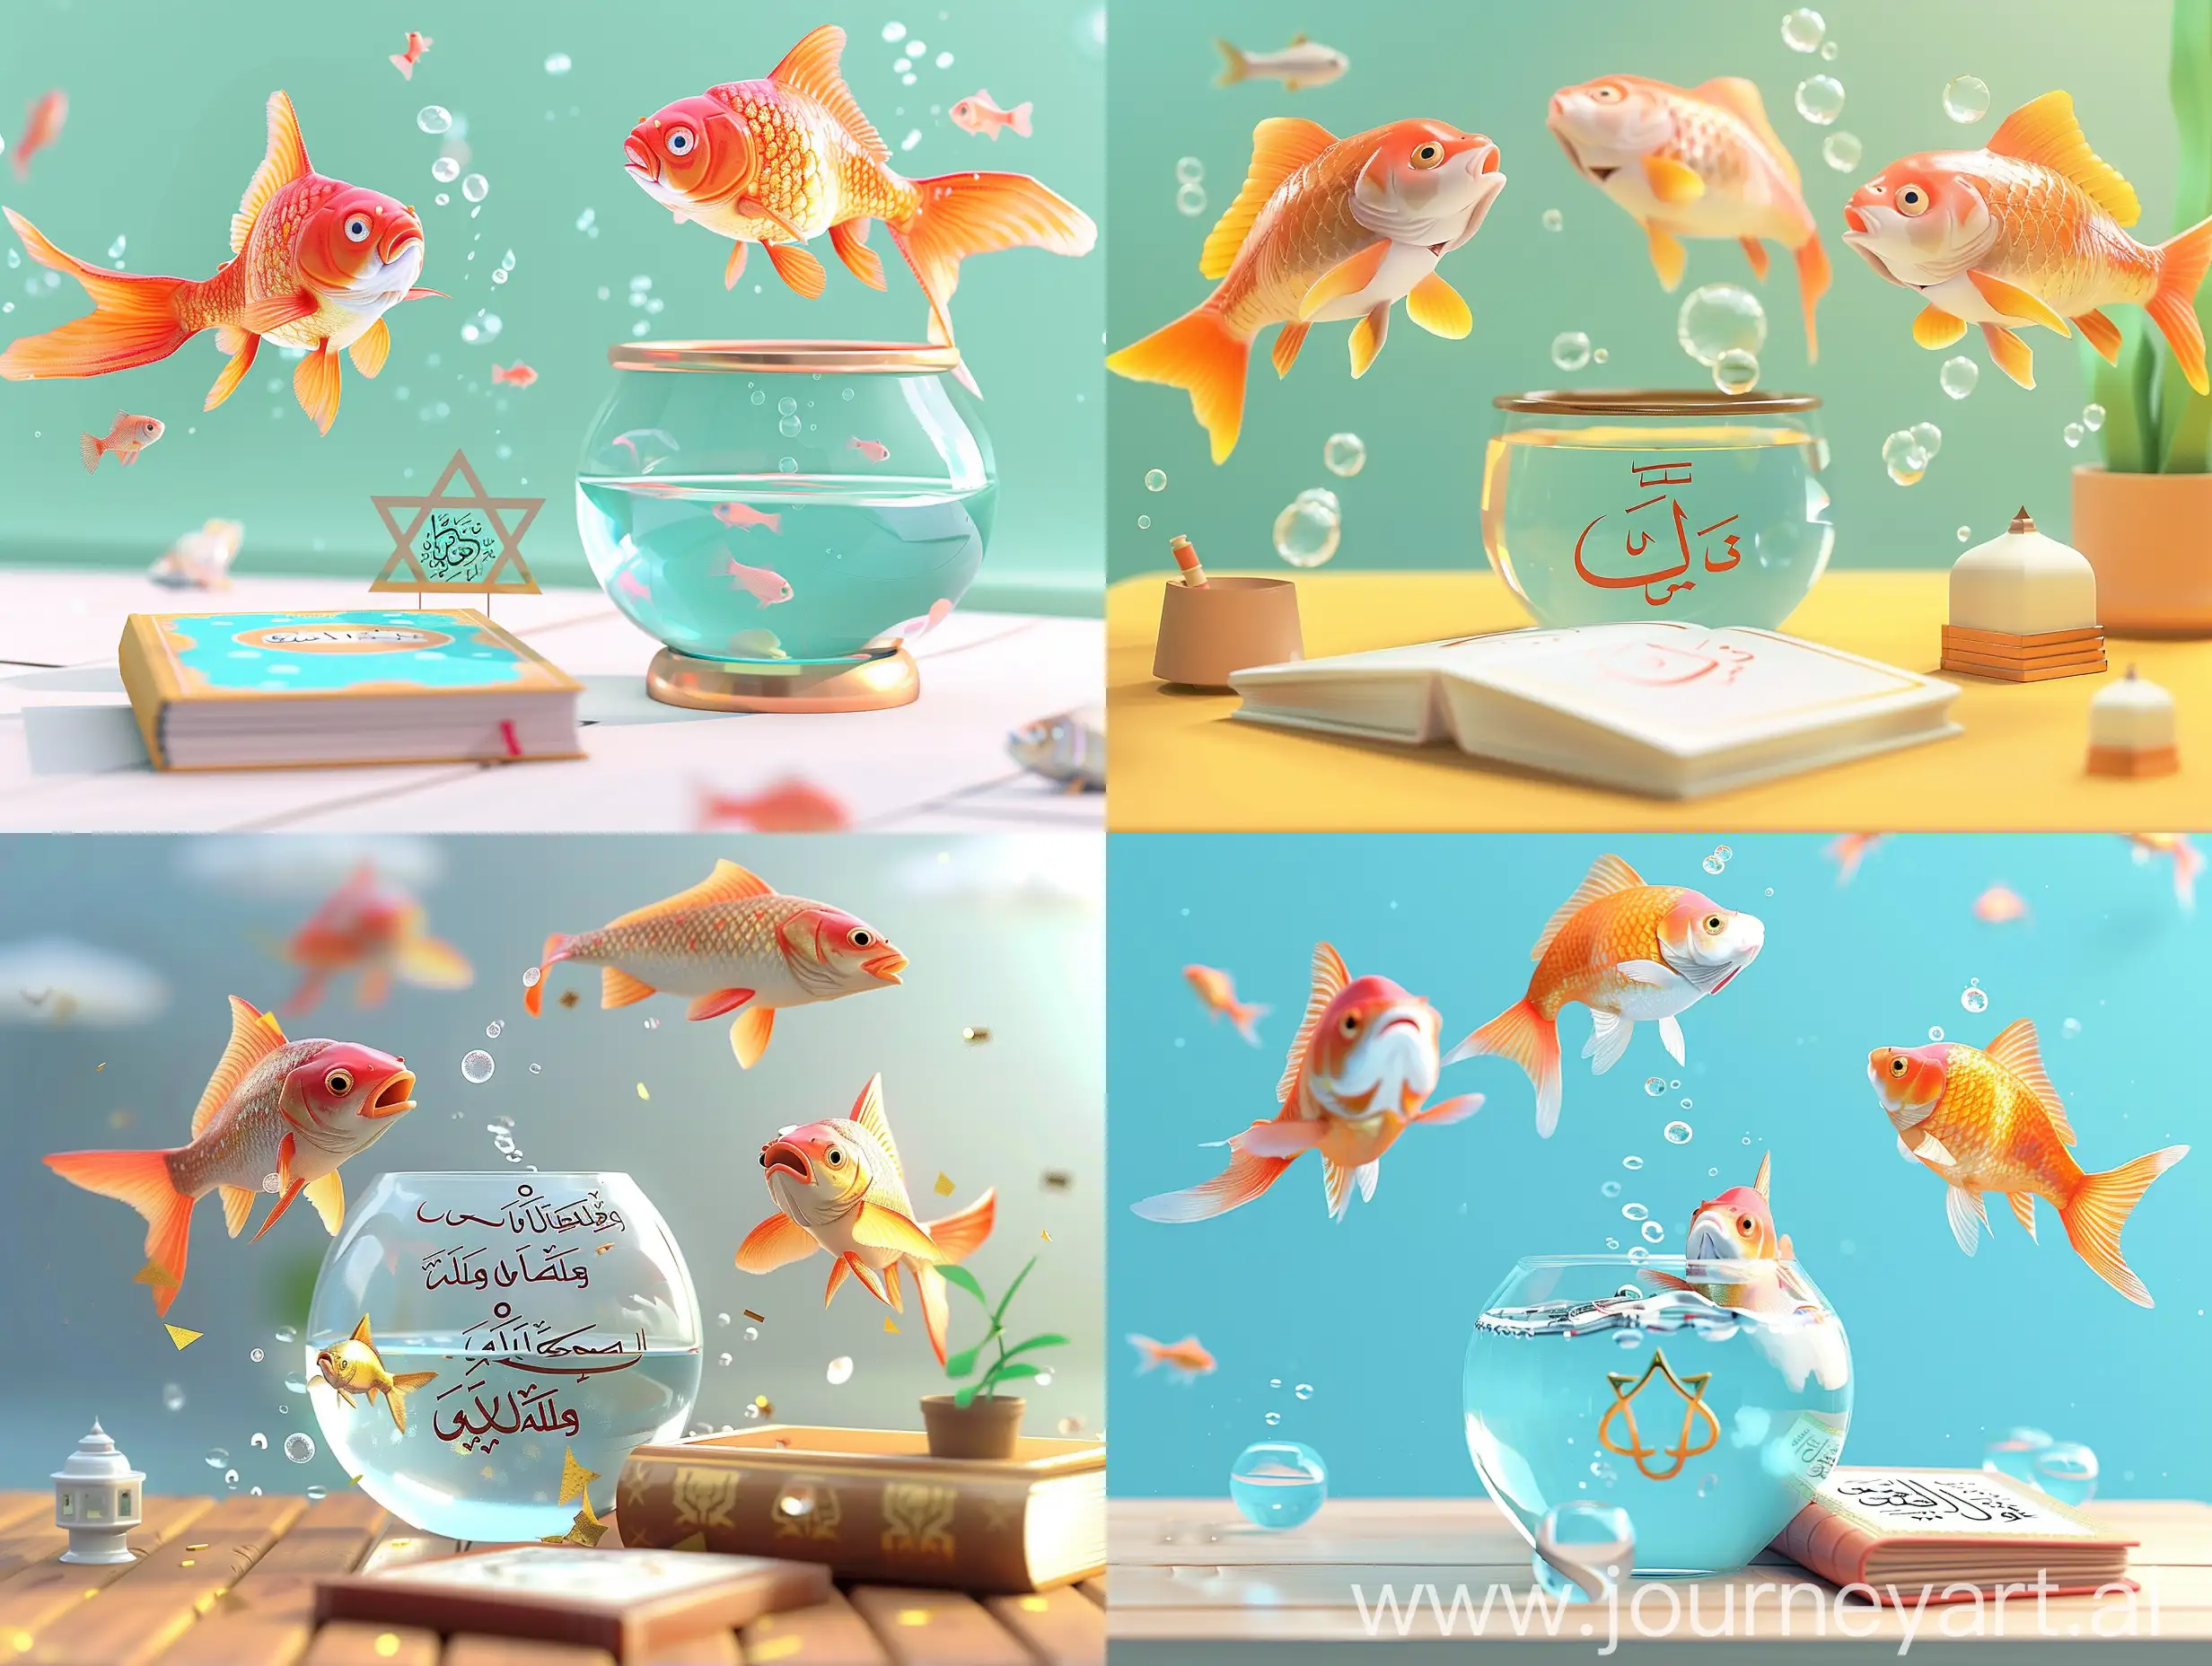 redfish jumping out of fish bowl in haft sin 3d cartoon illustration. and there is a Quran in front of it and a Ramadan symbol .